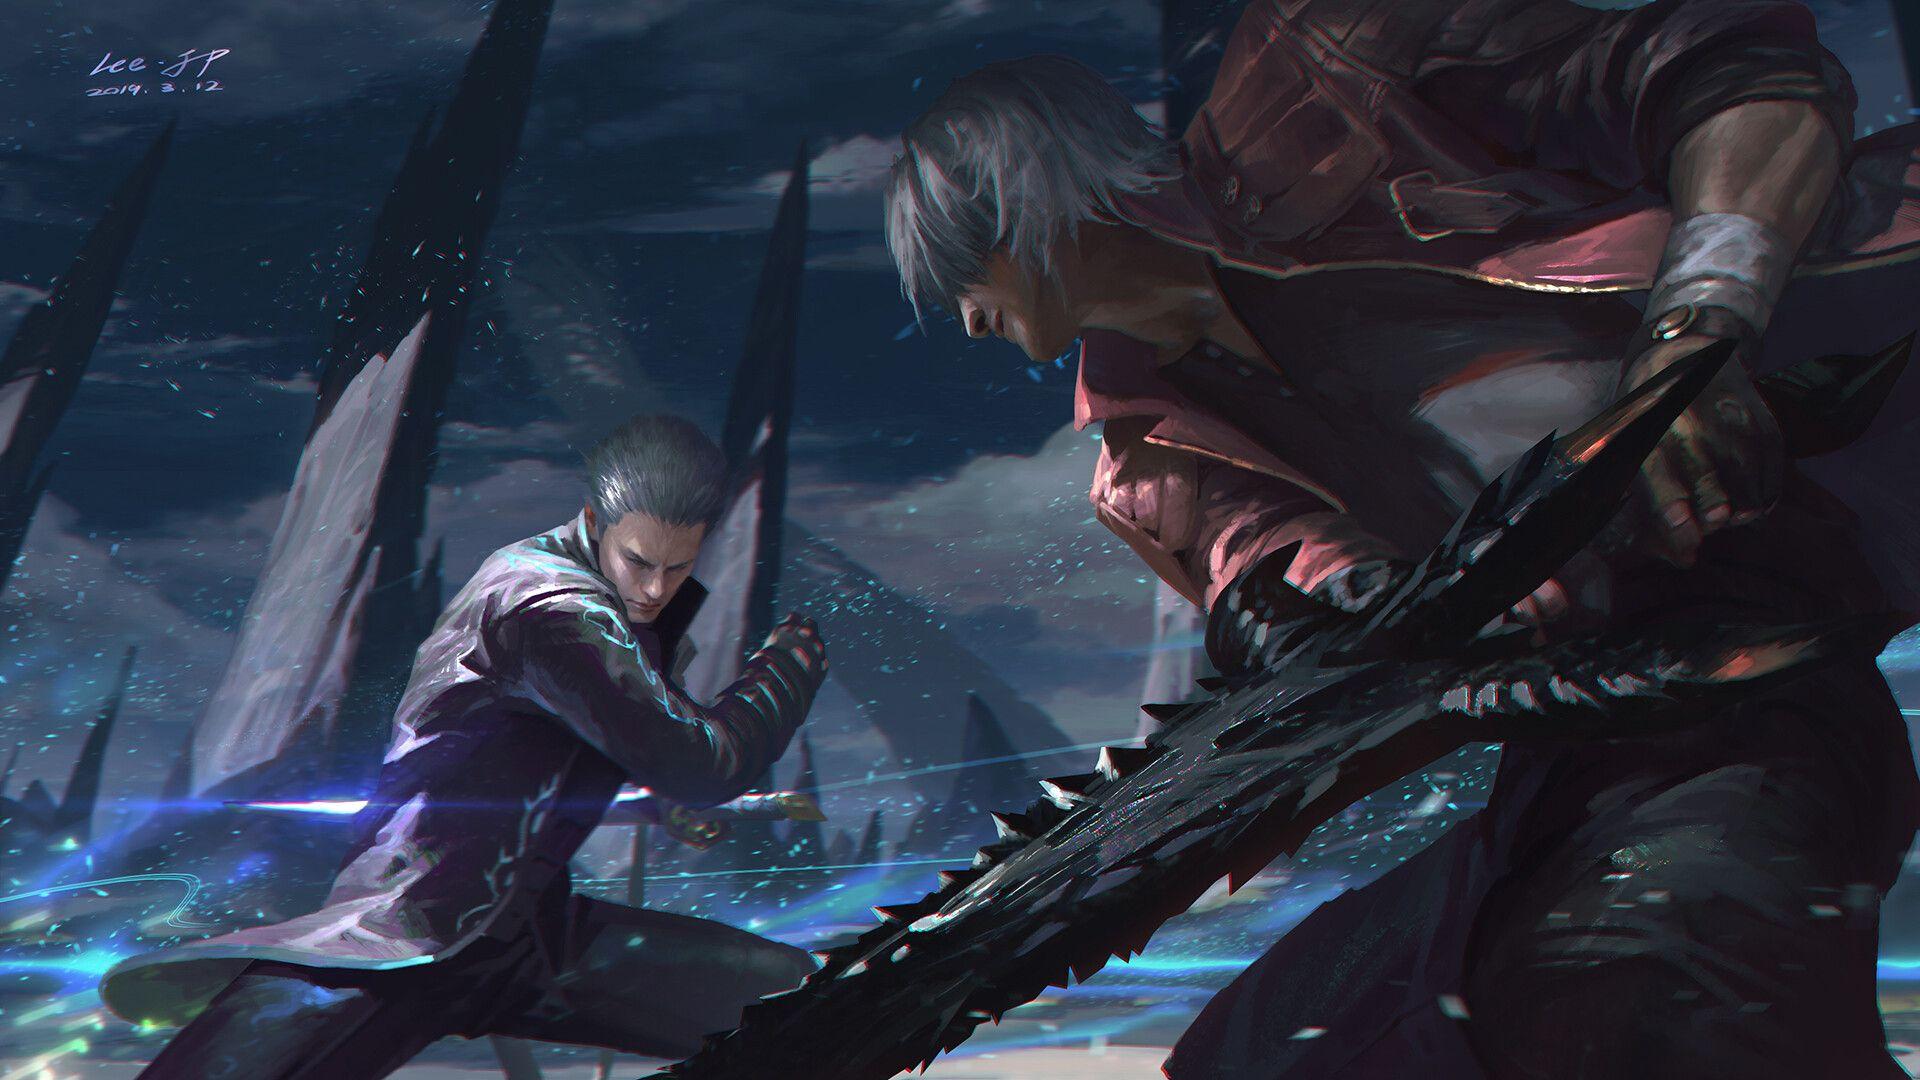 Devil May Cry Vergil Wallpapers - Wallpaper Cave Vergil Devil May Cry 3 Wallpaper